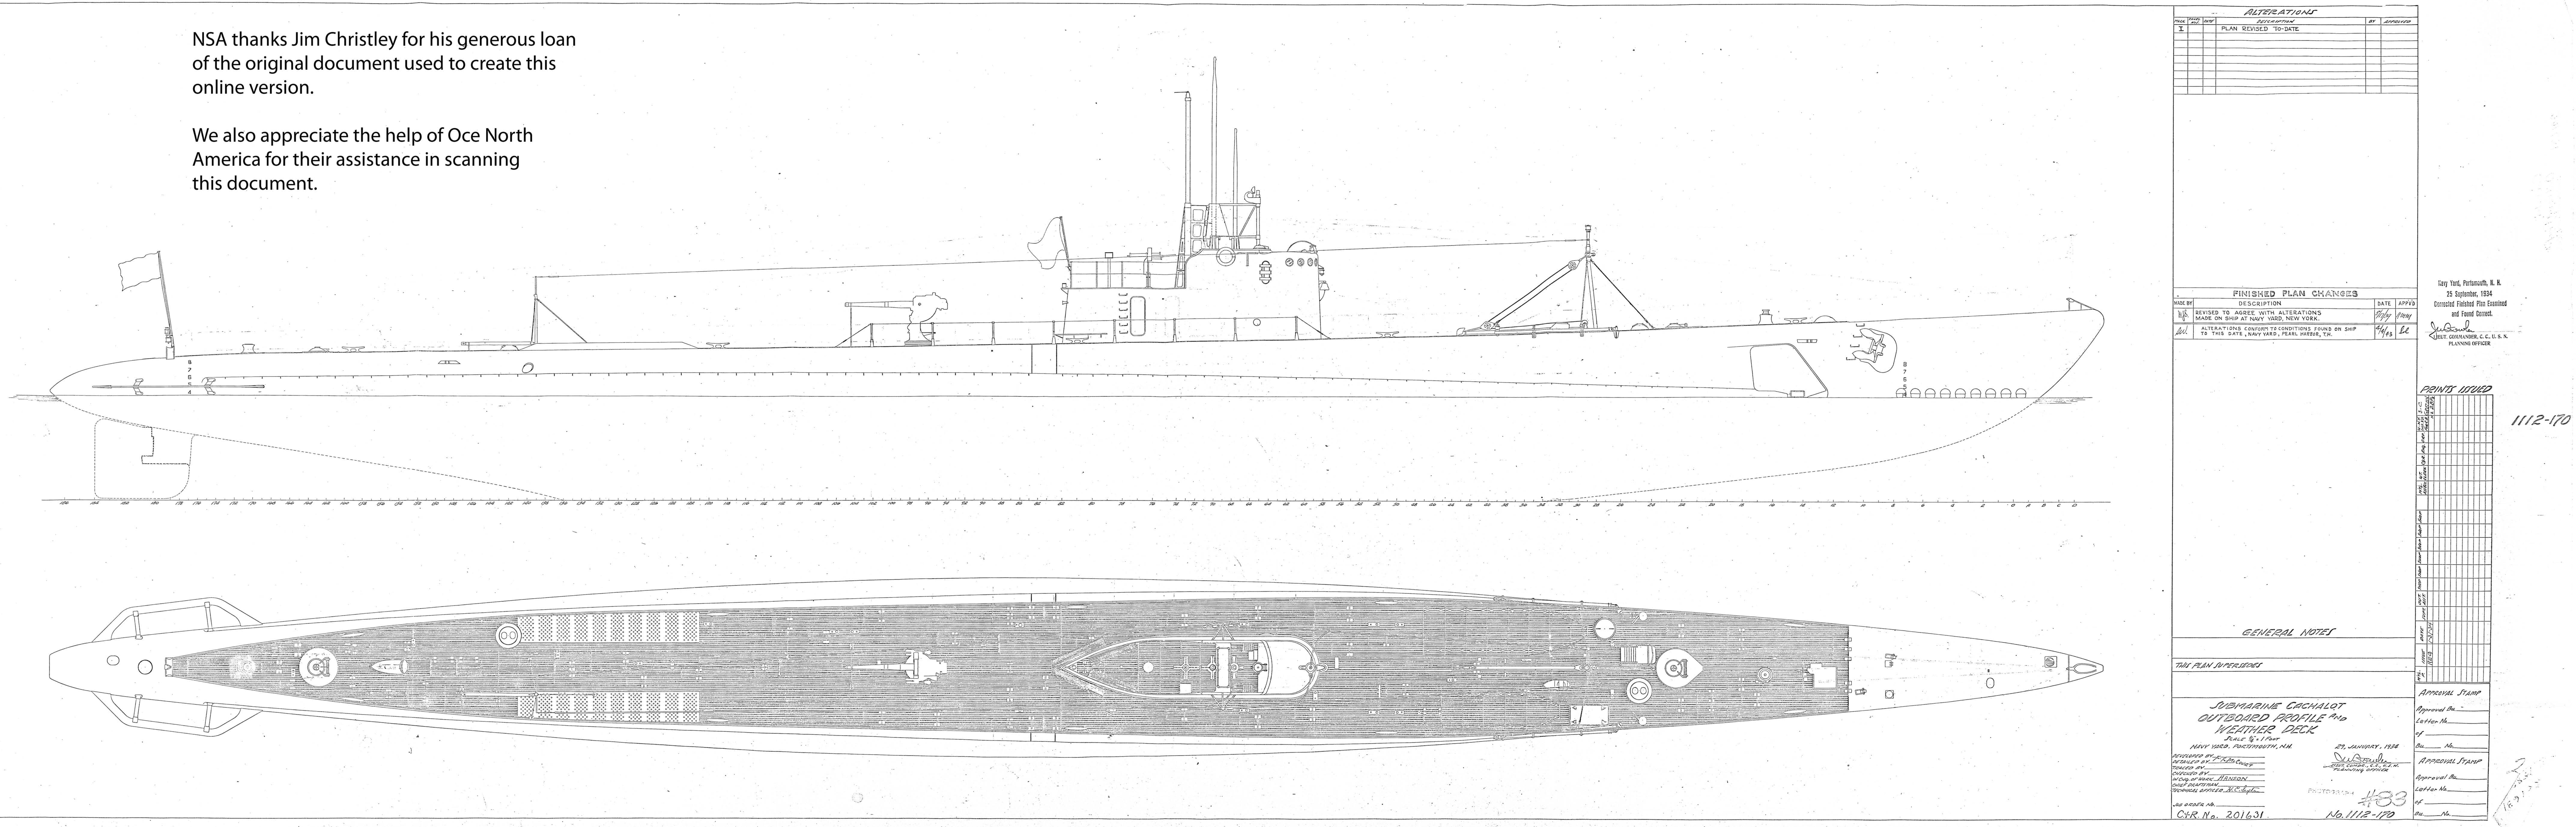 Plans adapted by Jim Christley for Maritime.org, downloaded via Internet Archive.